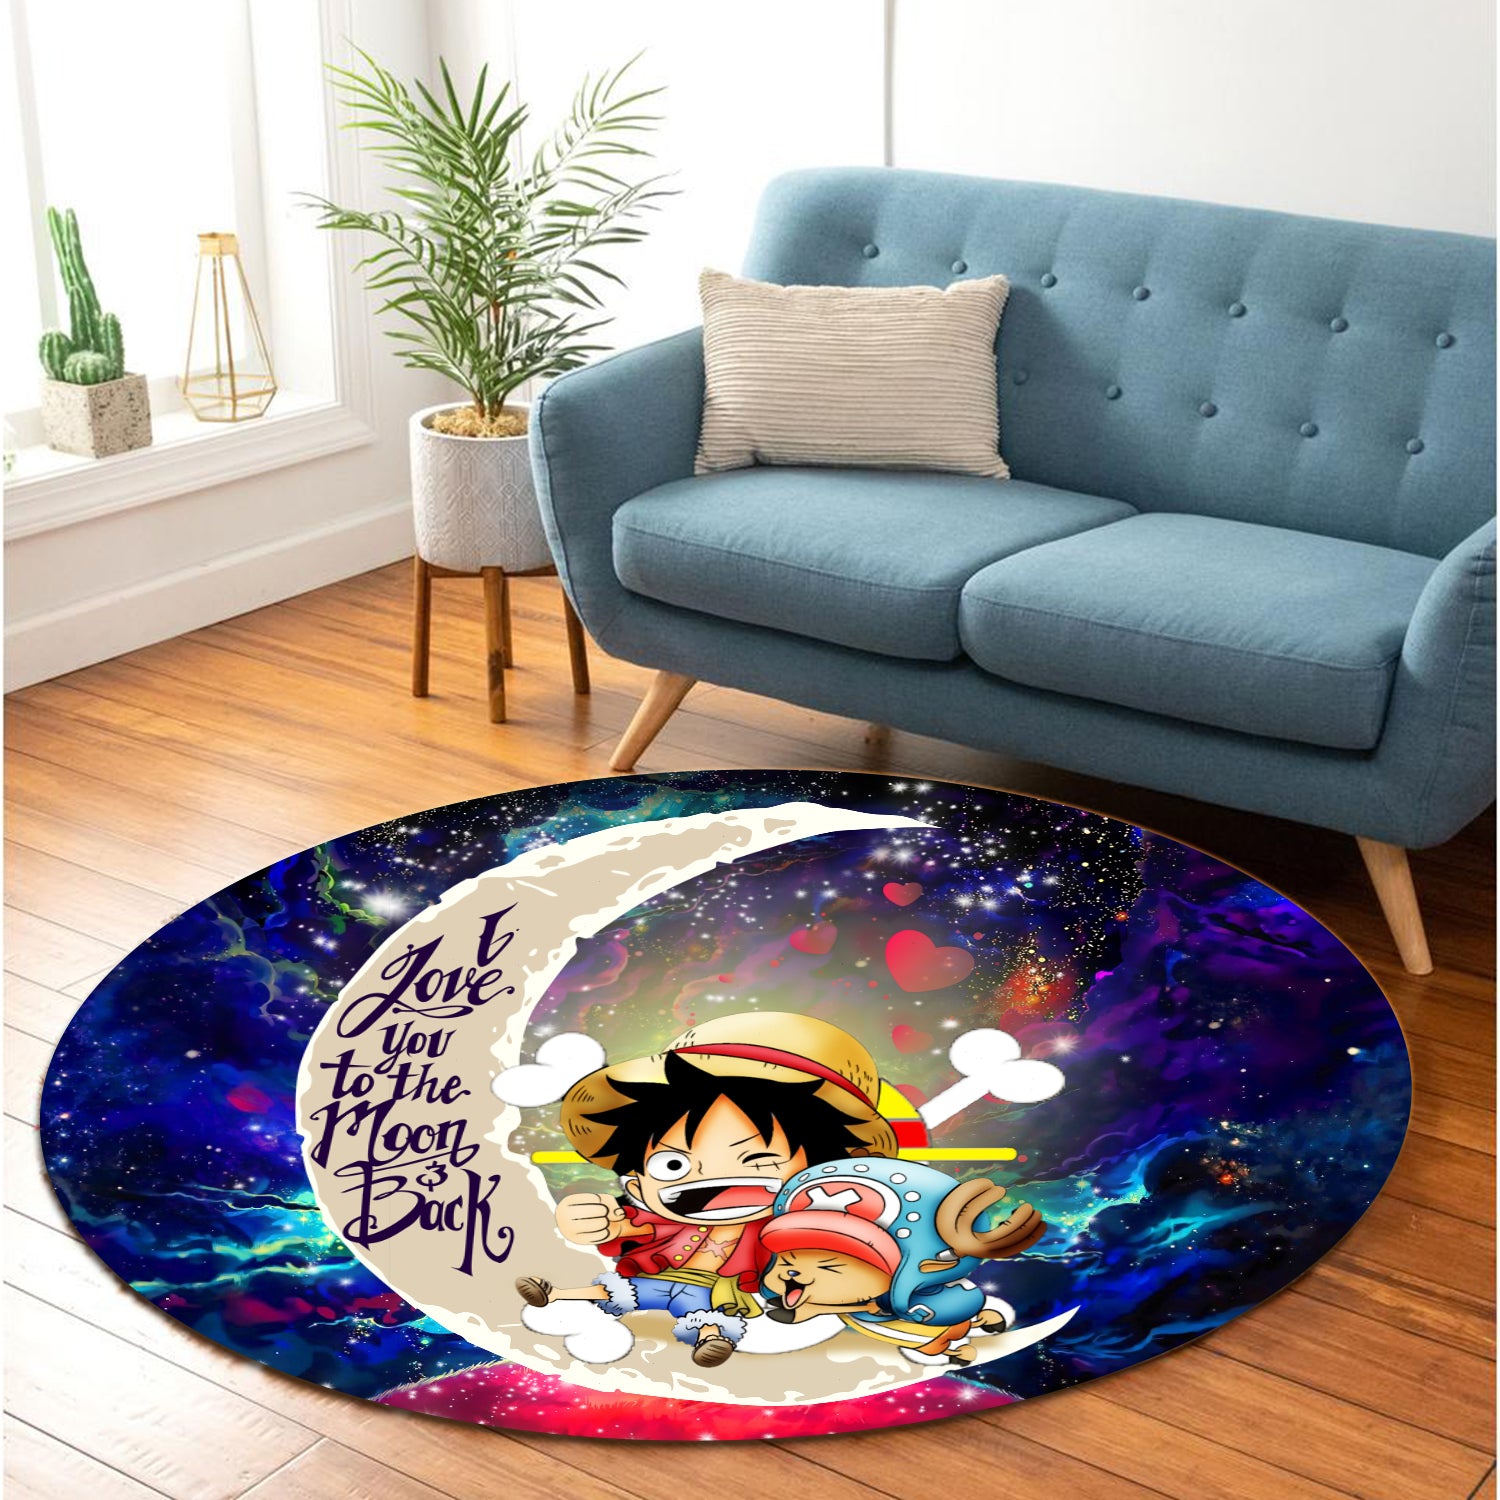 Chibi Luffy And Chopper One Piece Anime Love You To The Moon Galaxy Round Carpet Rug Bedroom Livingroom Home Decor Nearkii